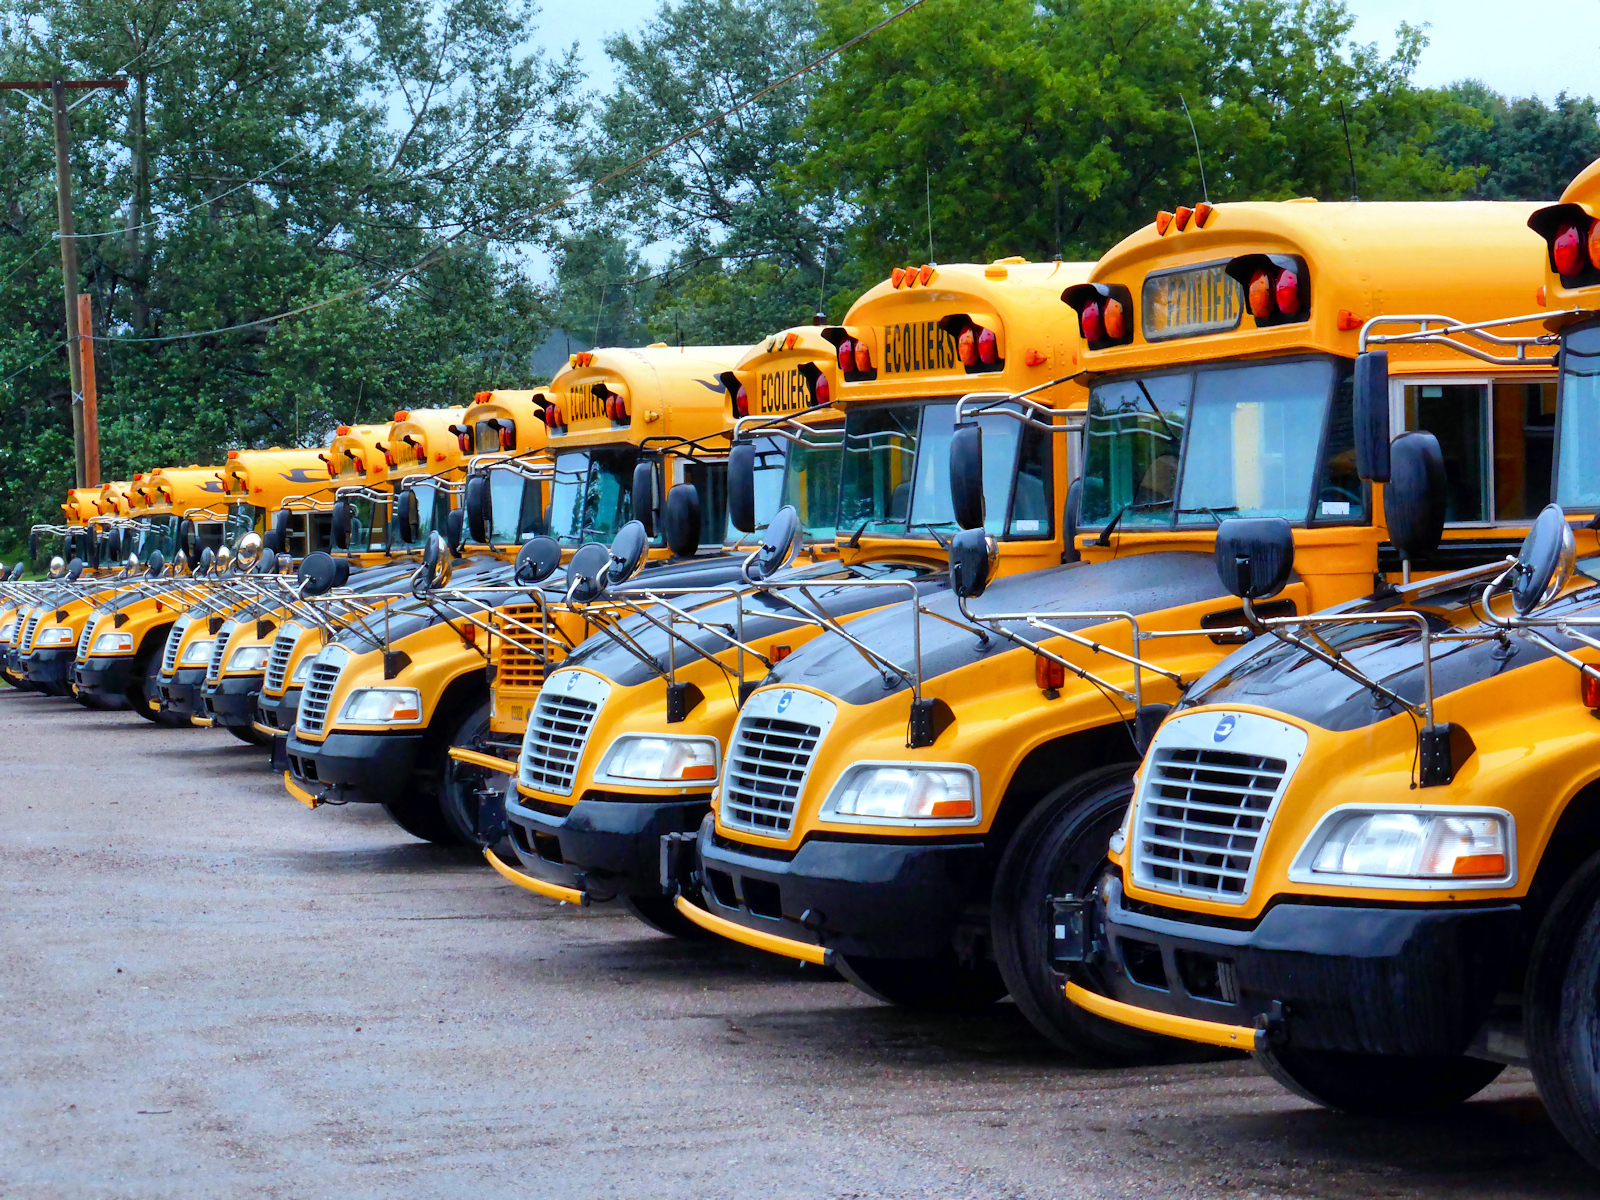 Ellington saves 75 percent on school bus contract using language in Lamont’s executive order